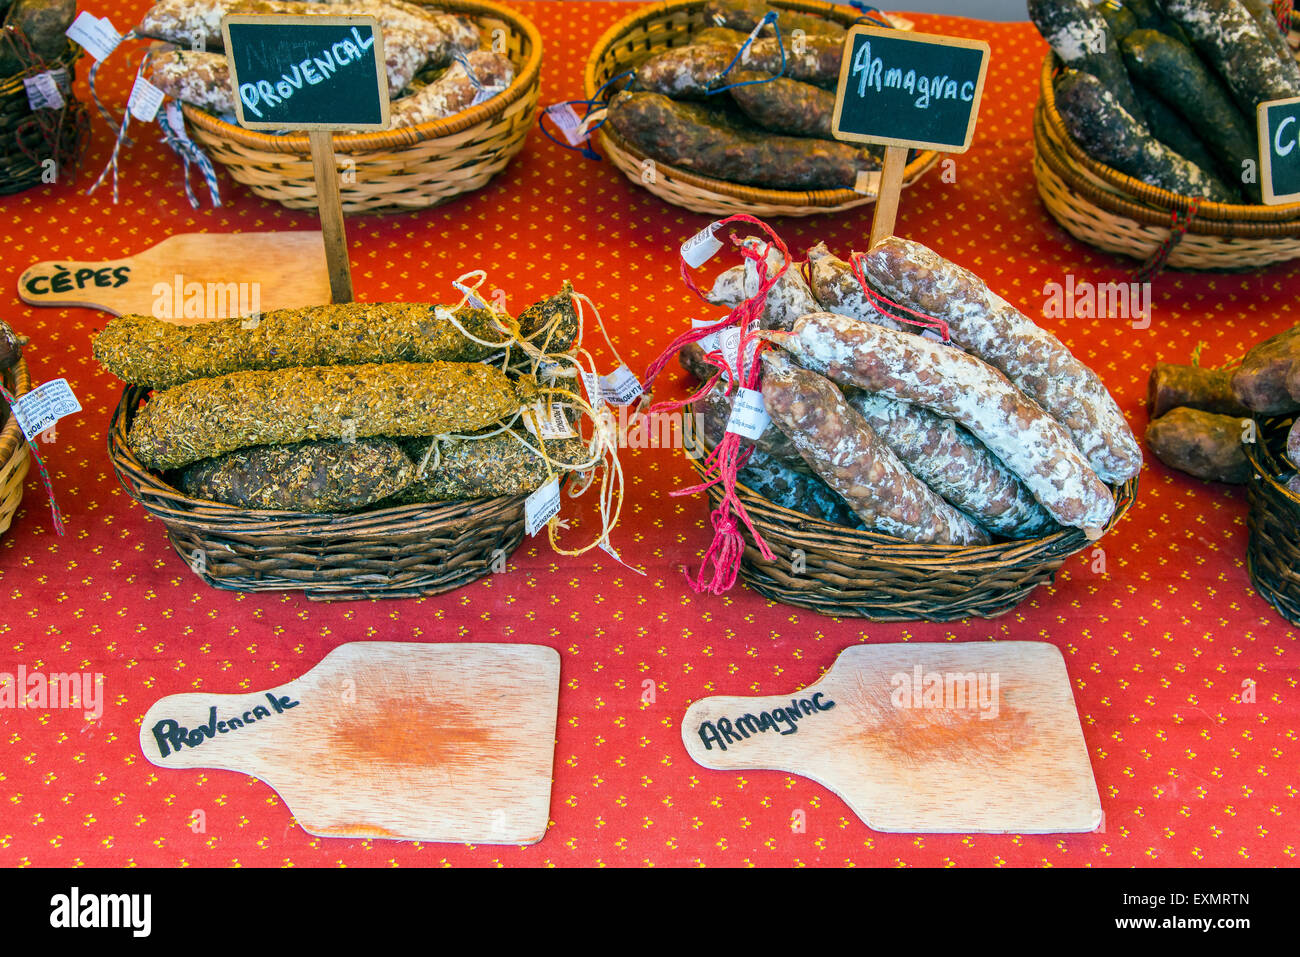 Local sausages or saucisson on sale at the market, Carpentras, Provence, France Stock Photo